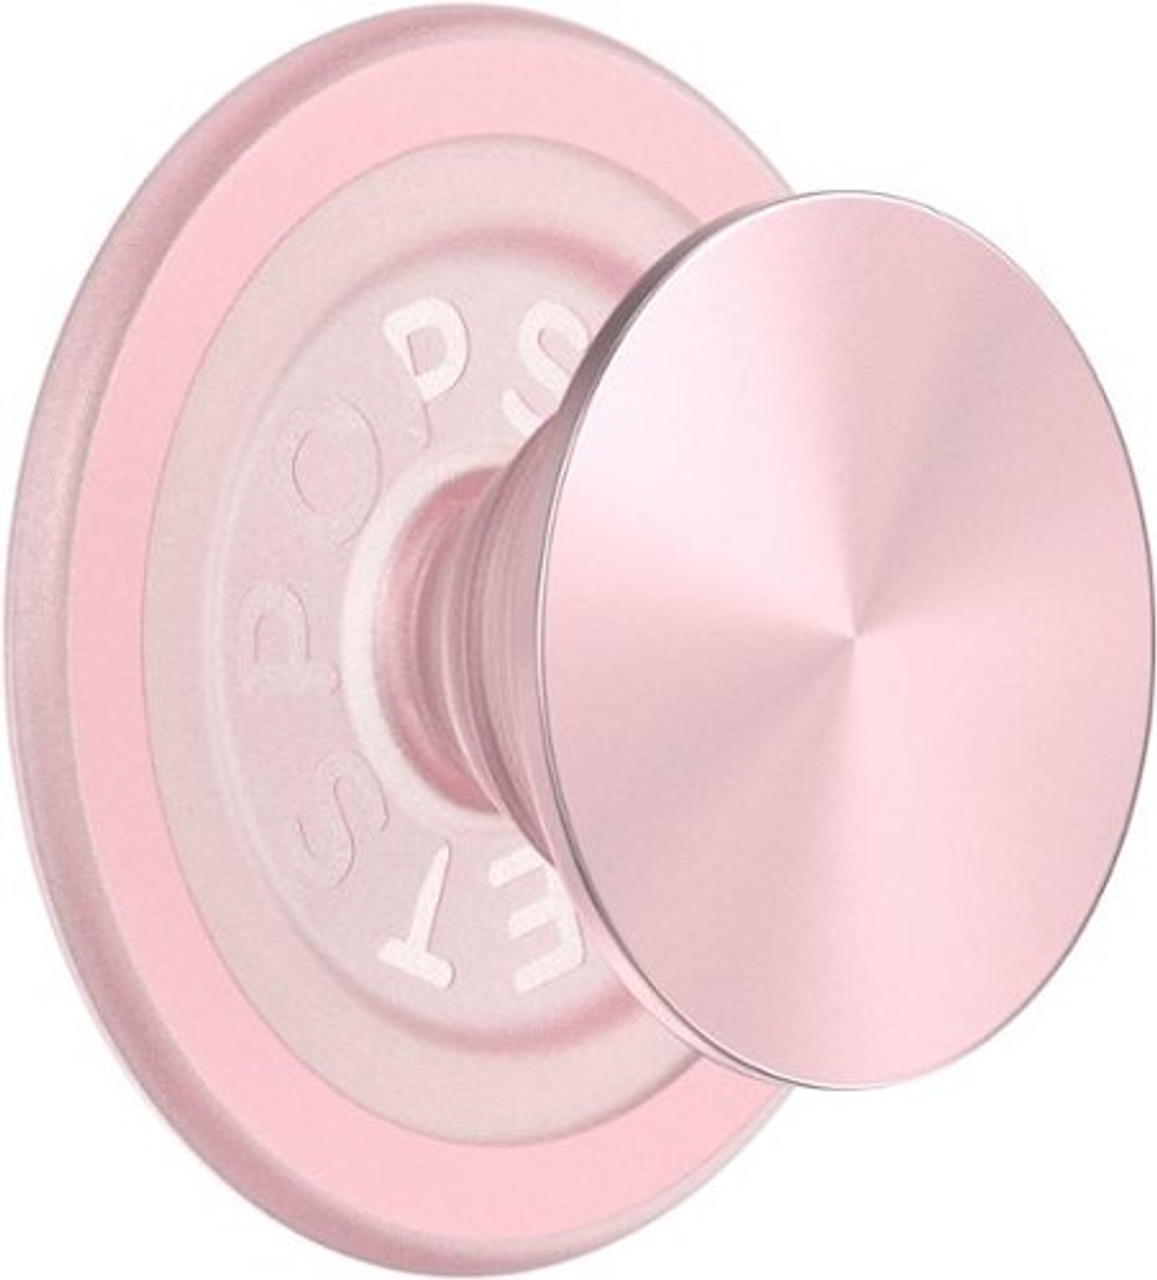 PopSockets - PopGrip Cell Phone Grip & Stand for MagSafe Devices - Rose